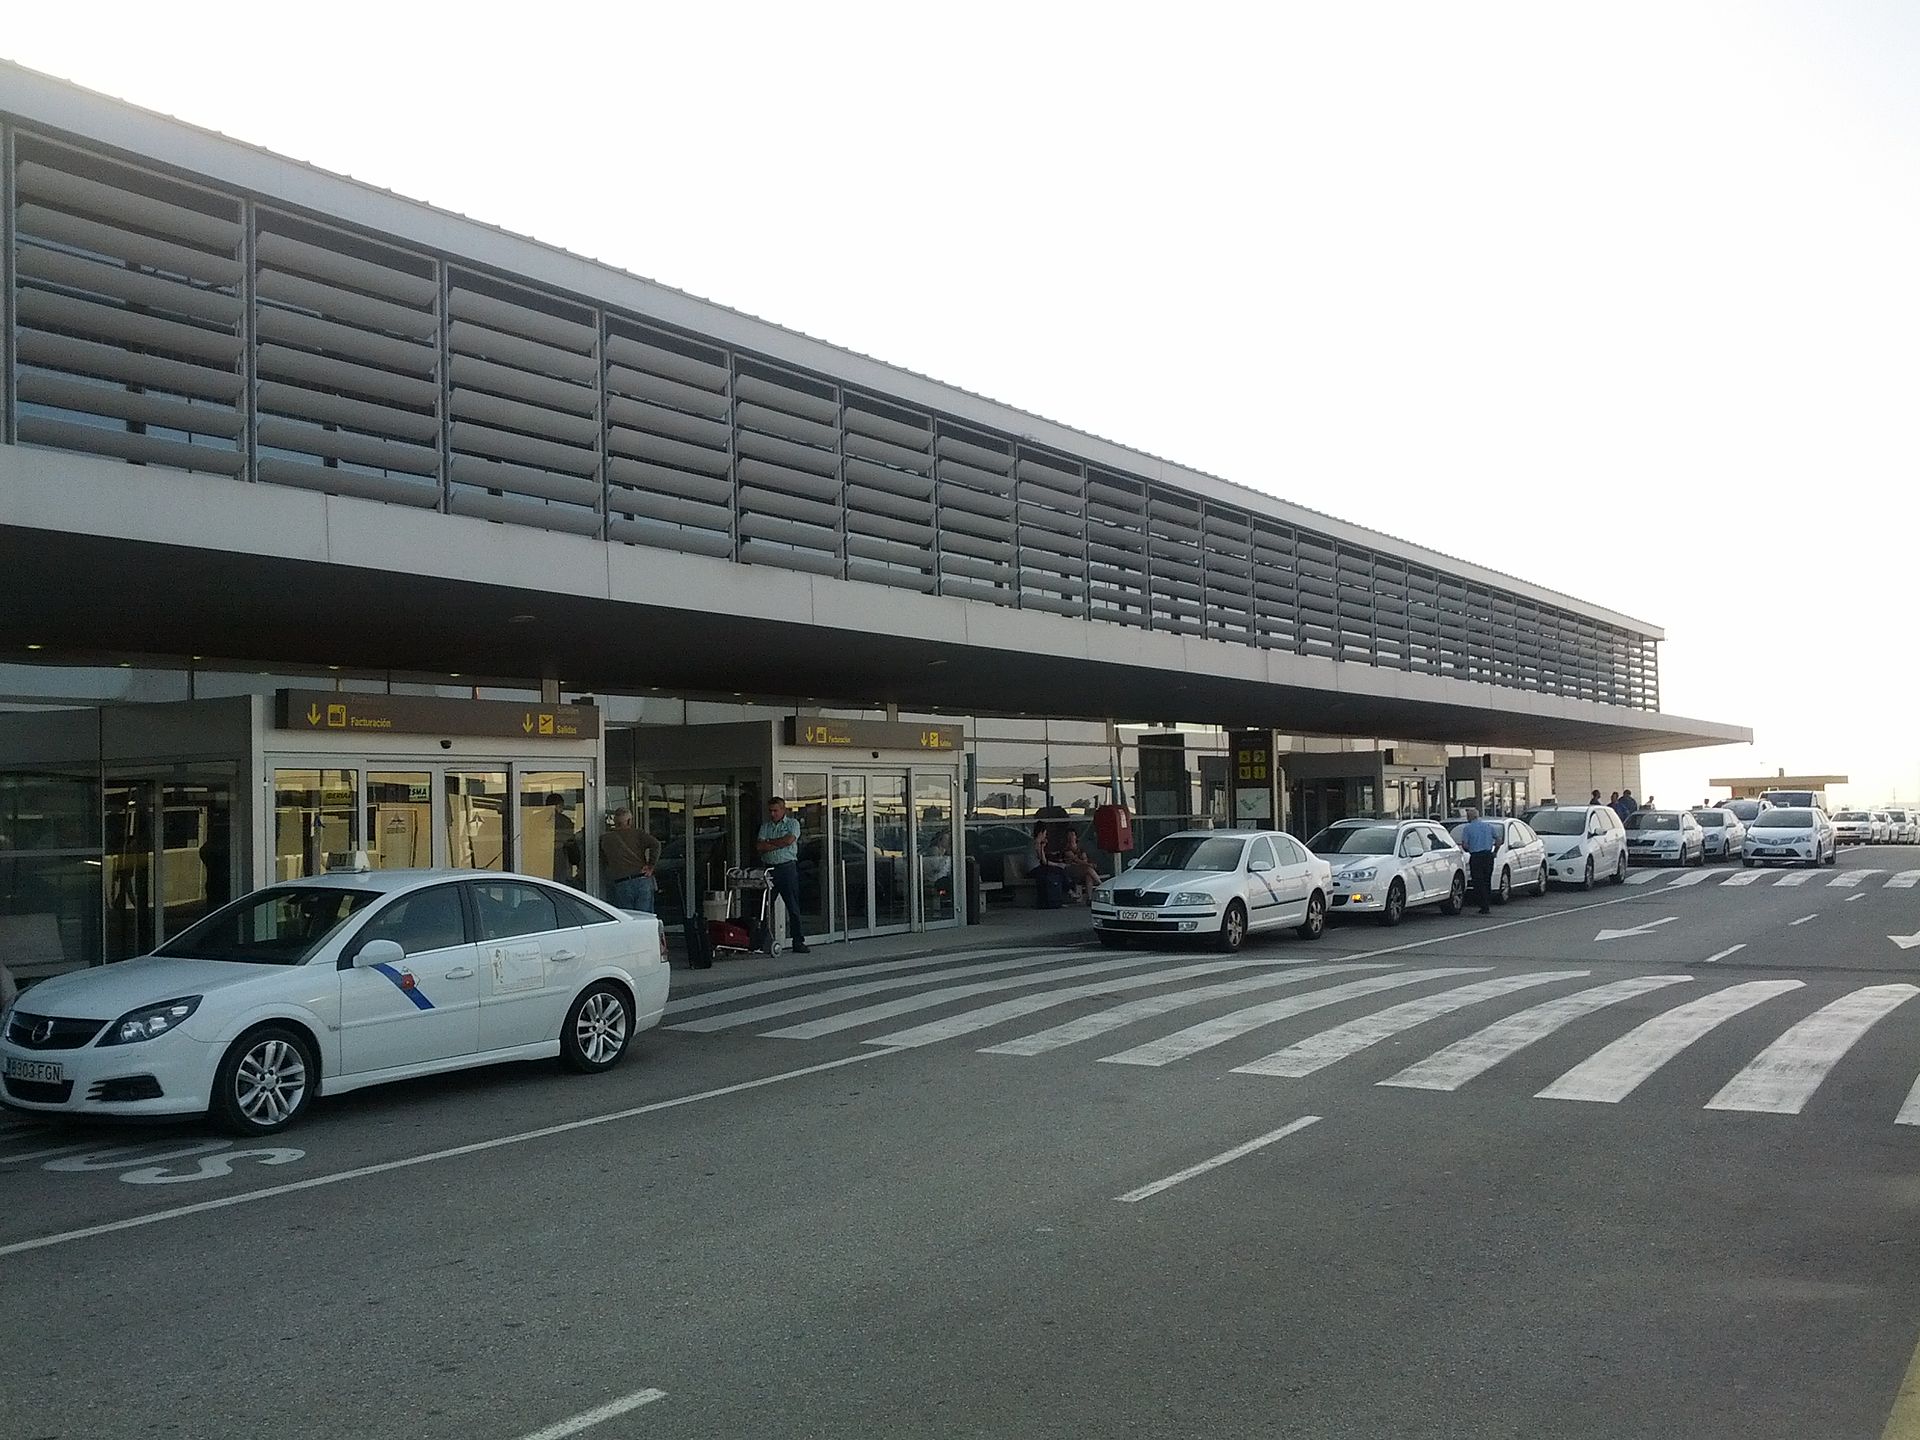 Reus Airport is the main international airport serving the city of Reus.